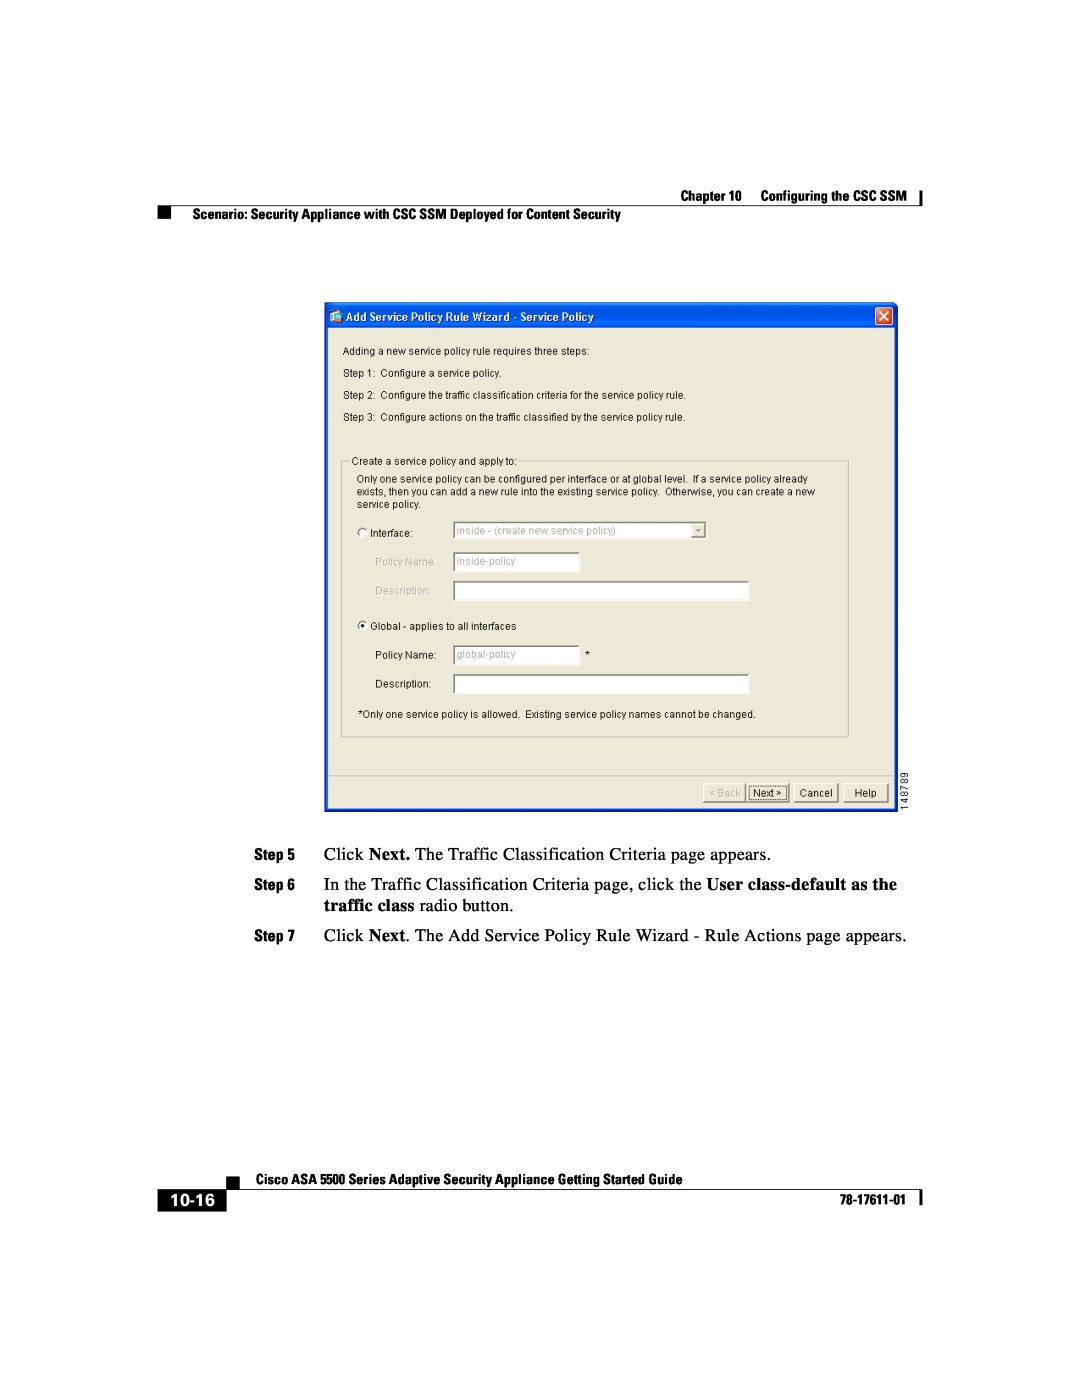 Cisco Systems ASA 5500 manual Click Next. The Traffic Classification Criteria page appears, 10-16 